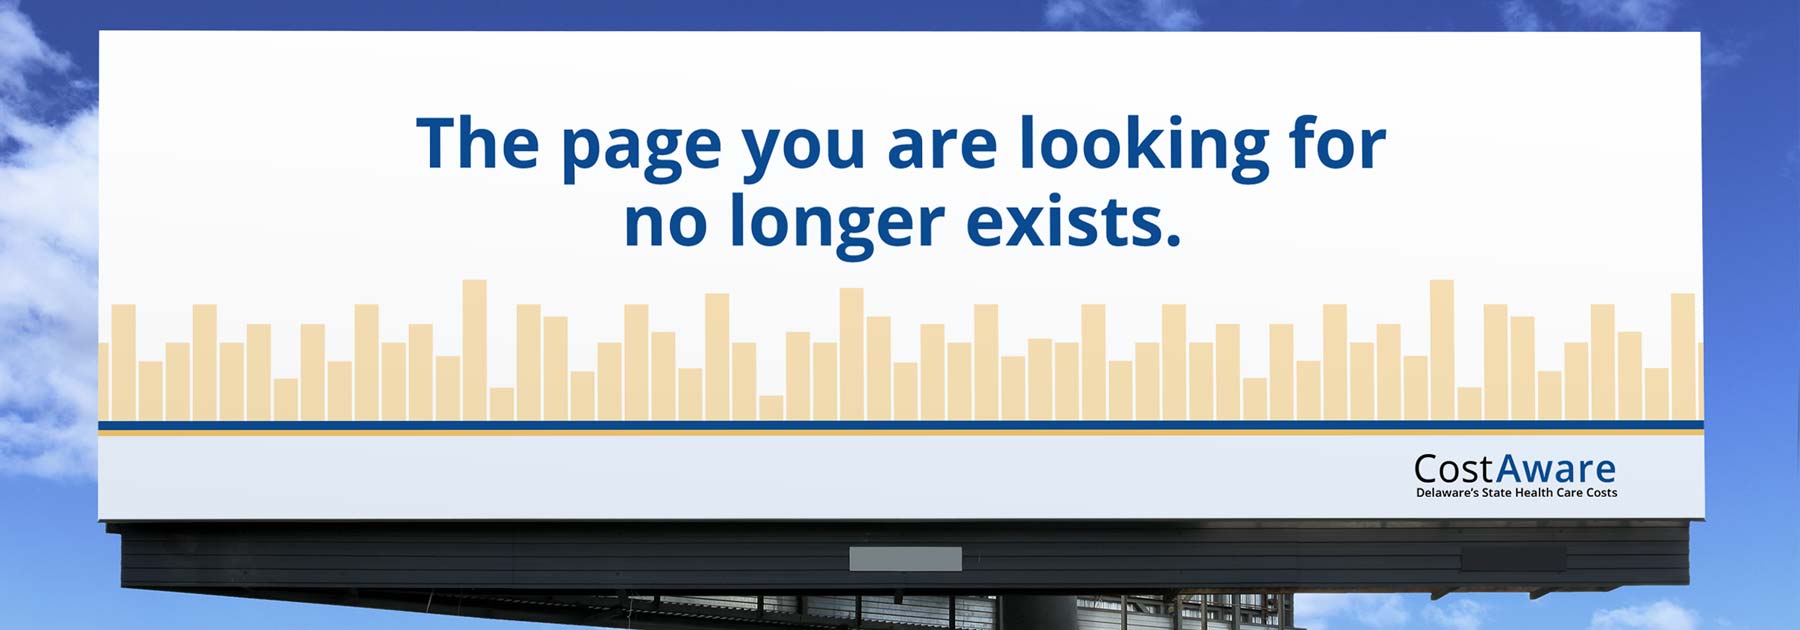 The page you are looking for no longer exists.